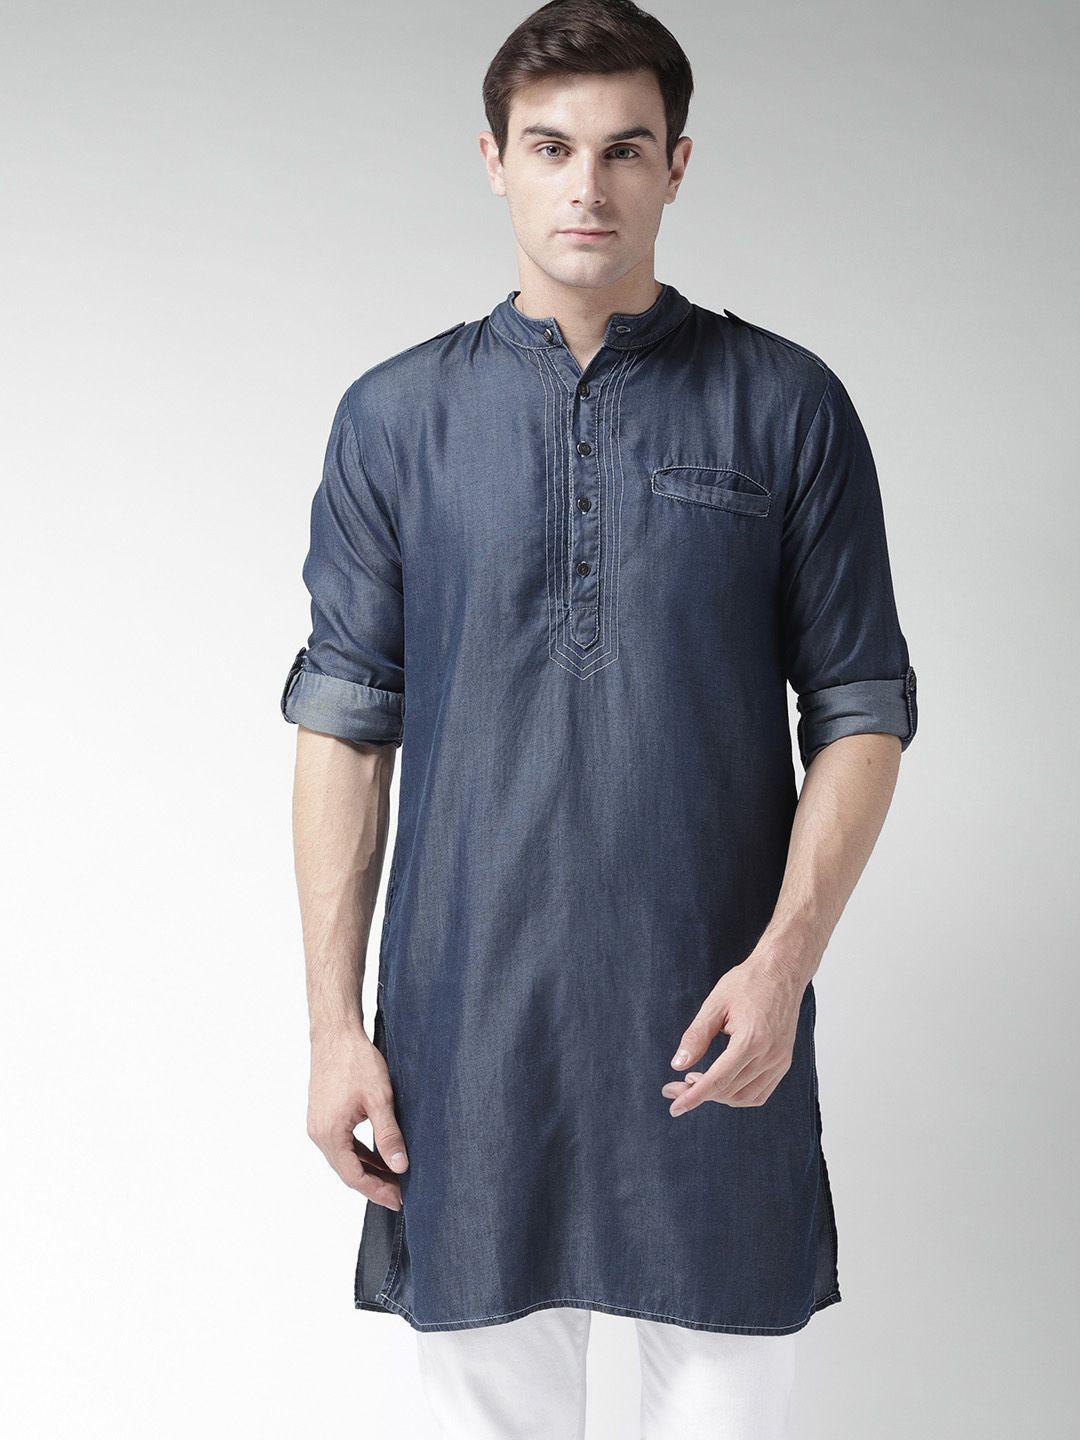 style quotient by noi men navy blue chambray solid pathani kurta